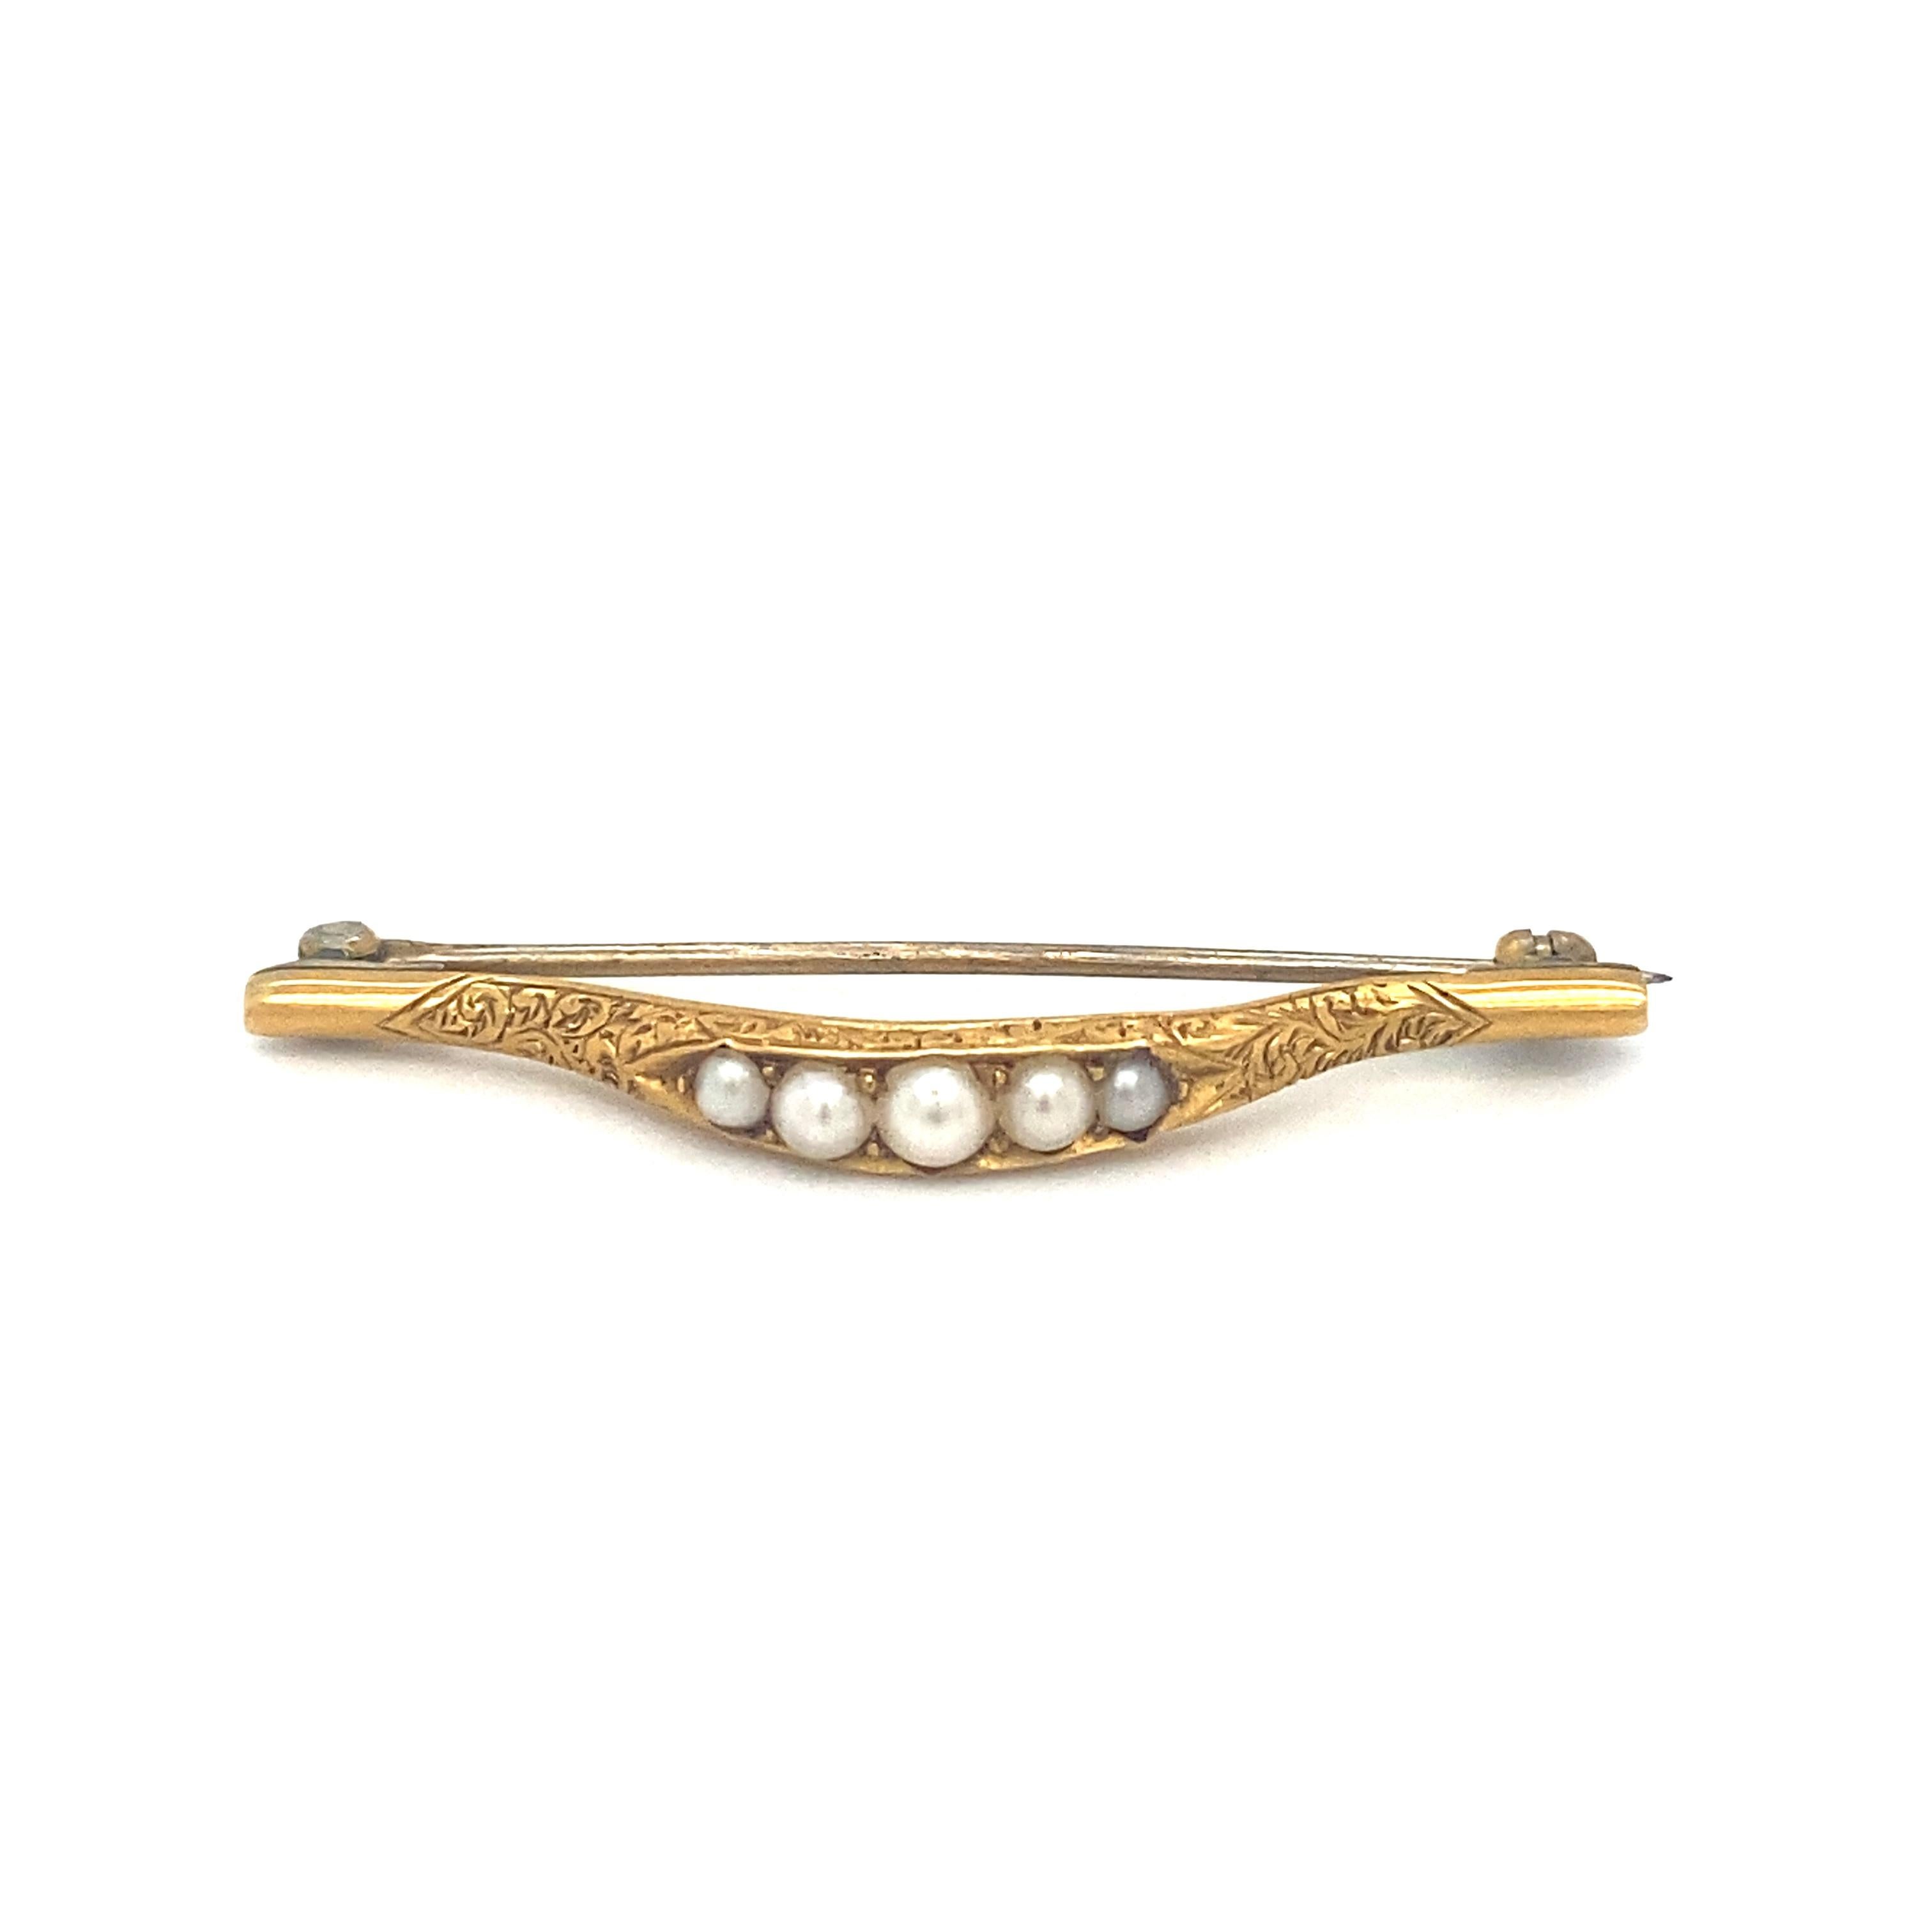 Item Details: This unique lingerie pin or brooch has an intricate repousse floral design with graduated seed pearls. This pin has an engraved date 